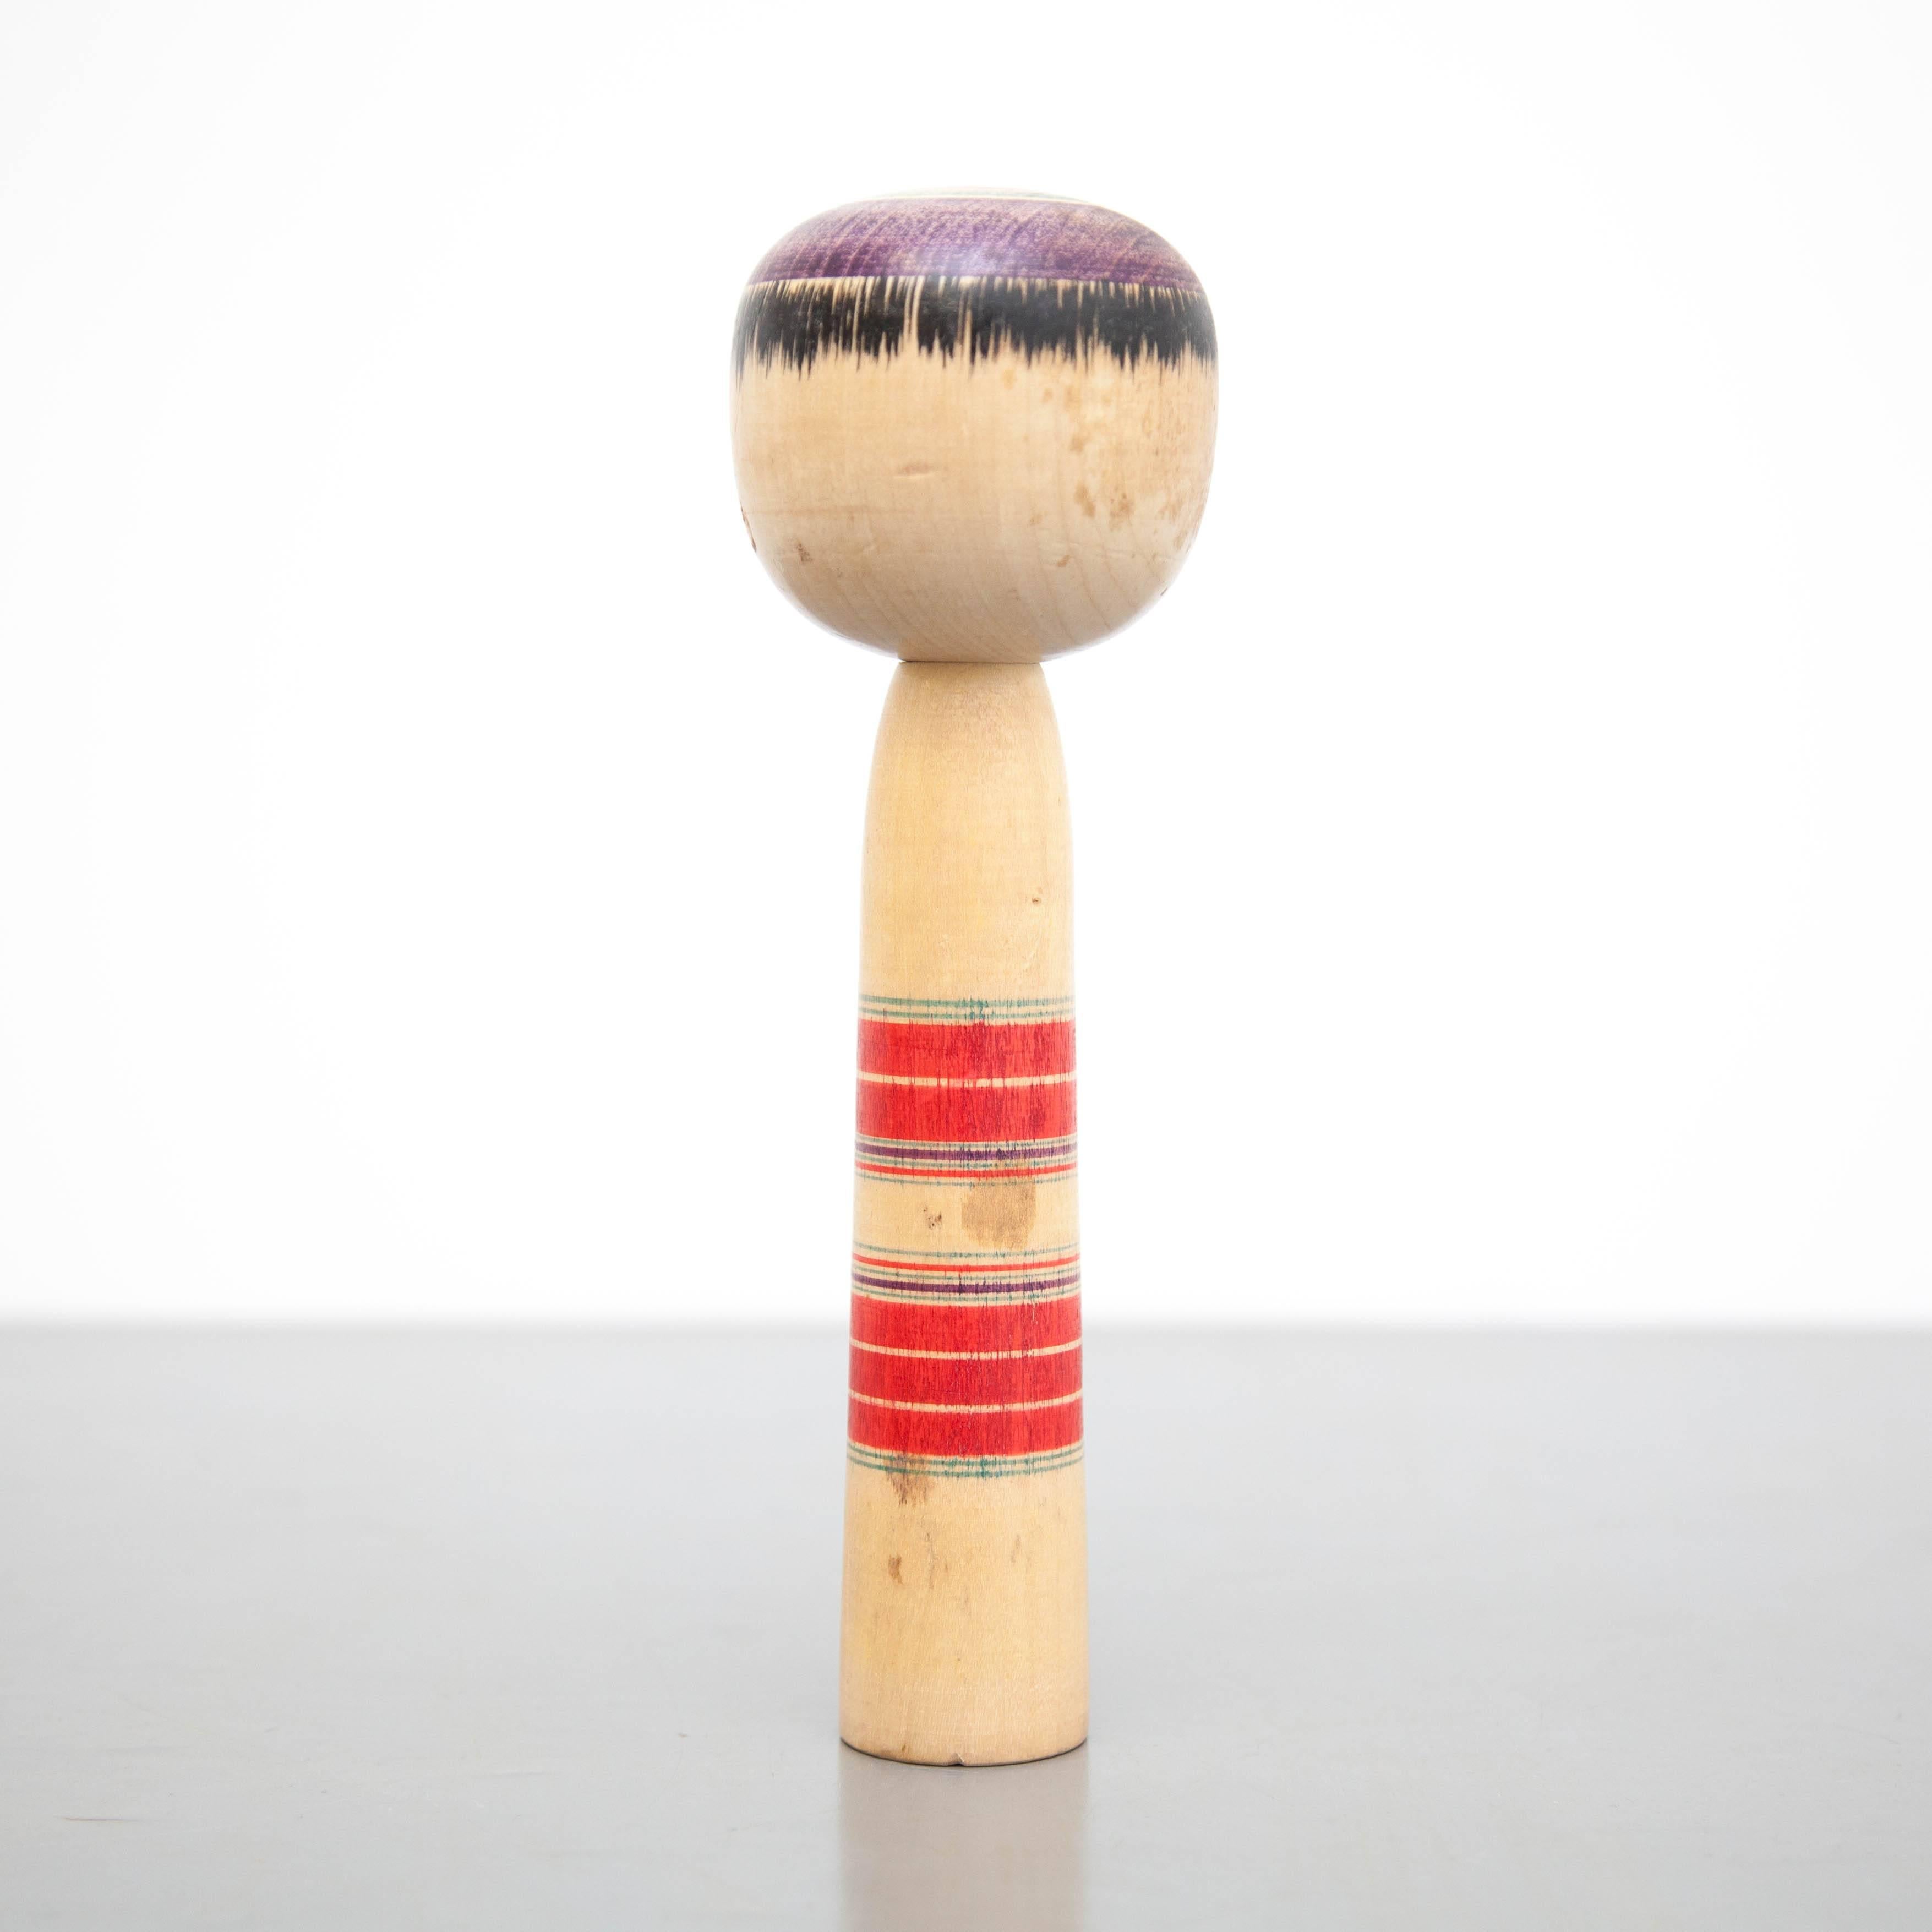 Japanese doll called Kokeshi of the early 20th century.
Provenance from the northern Japan.
Dolls shapes and patterns are particular to a certain area and are classified under eleven types, this doll is a Tsuchiyu type.

Handmade by Japanese